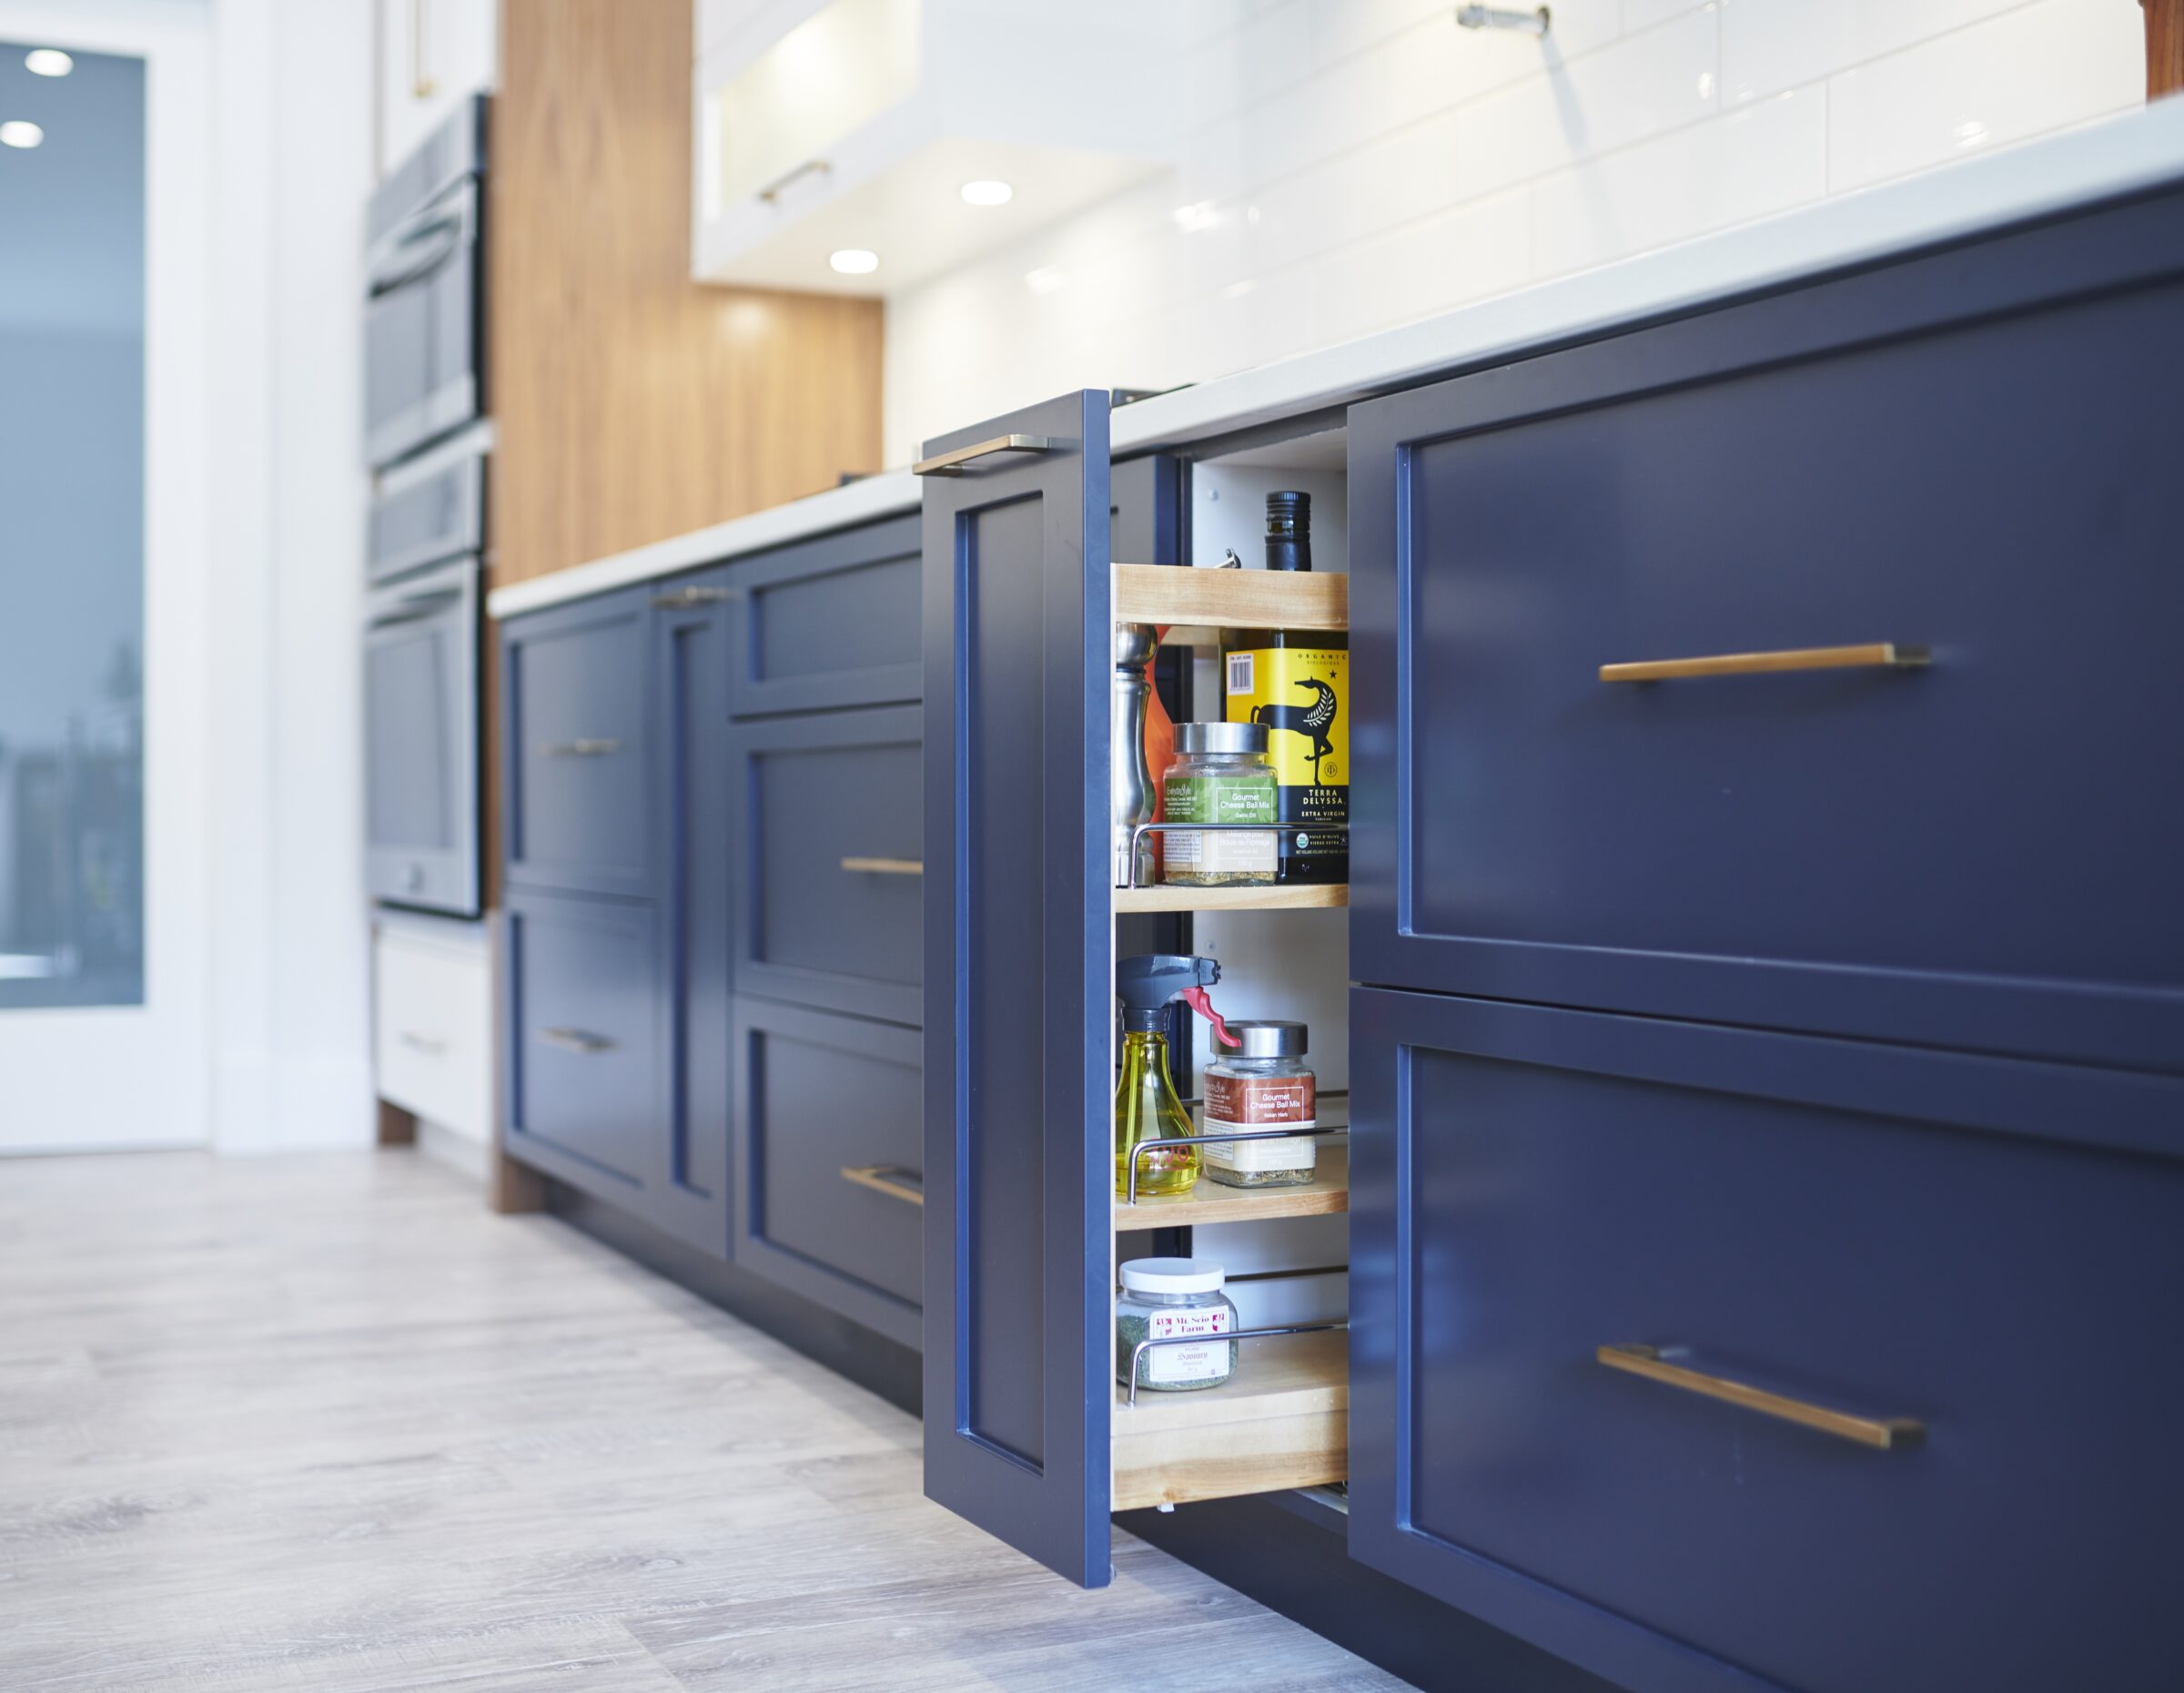 A modern kitchen with blue cabinets featuring brass handles. An open pull-out drawer reveals organized bottles and condiments. Bright, clean, and contemporary design.